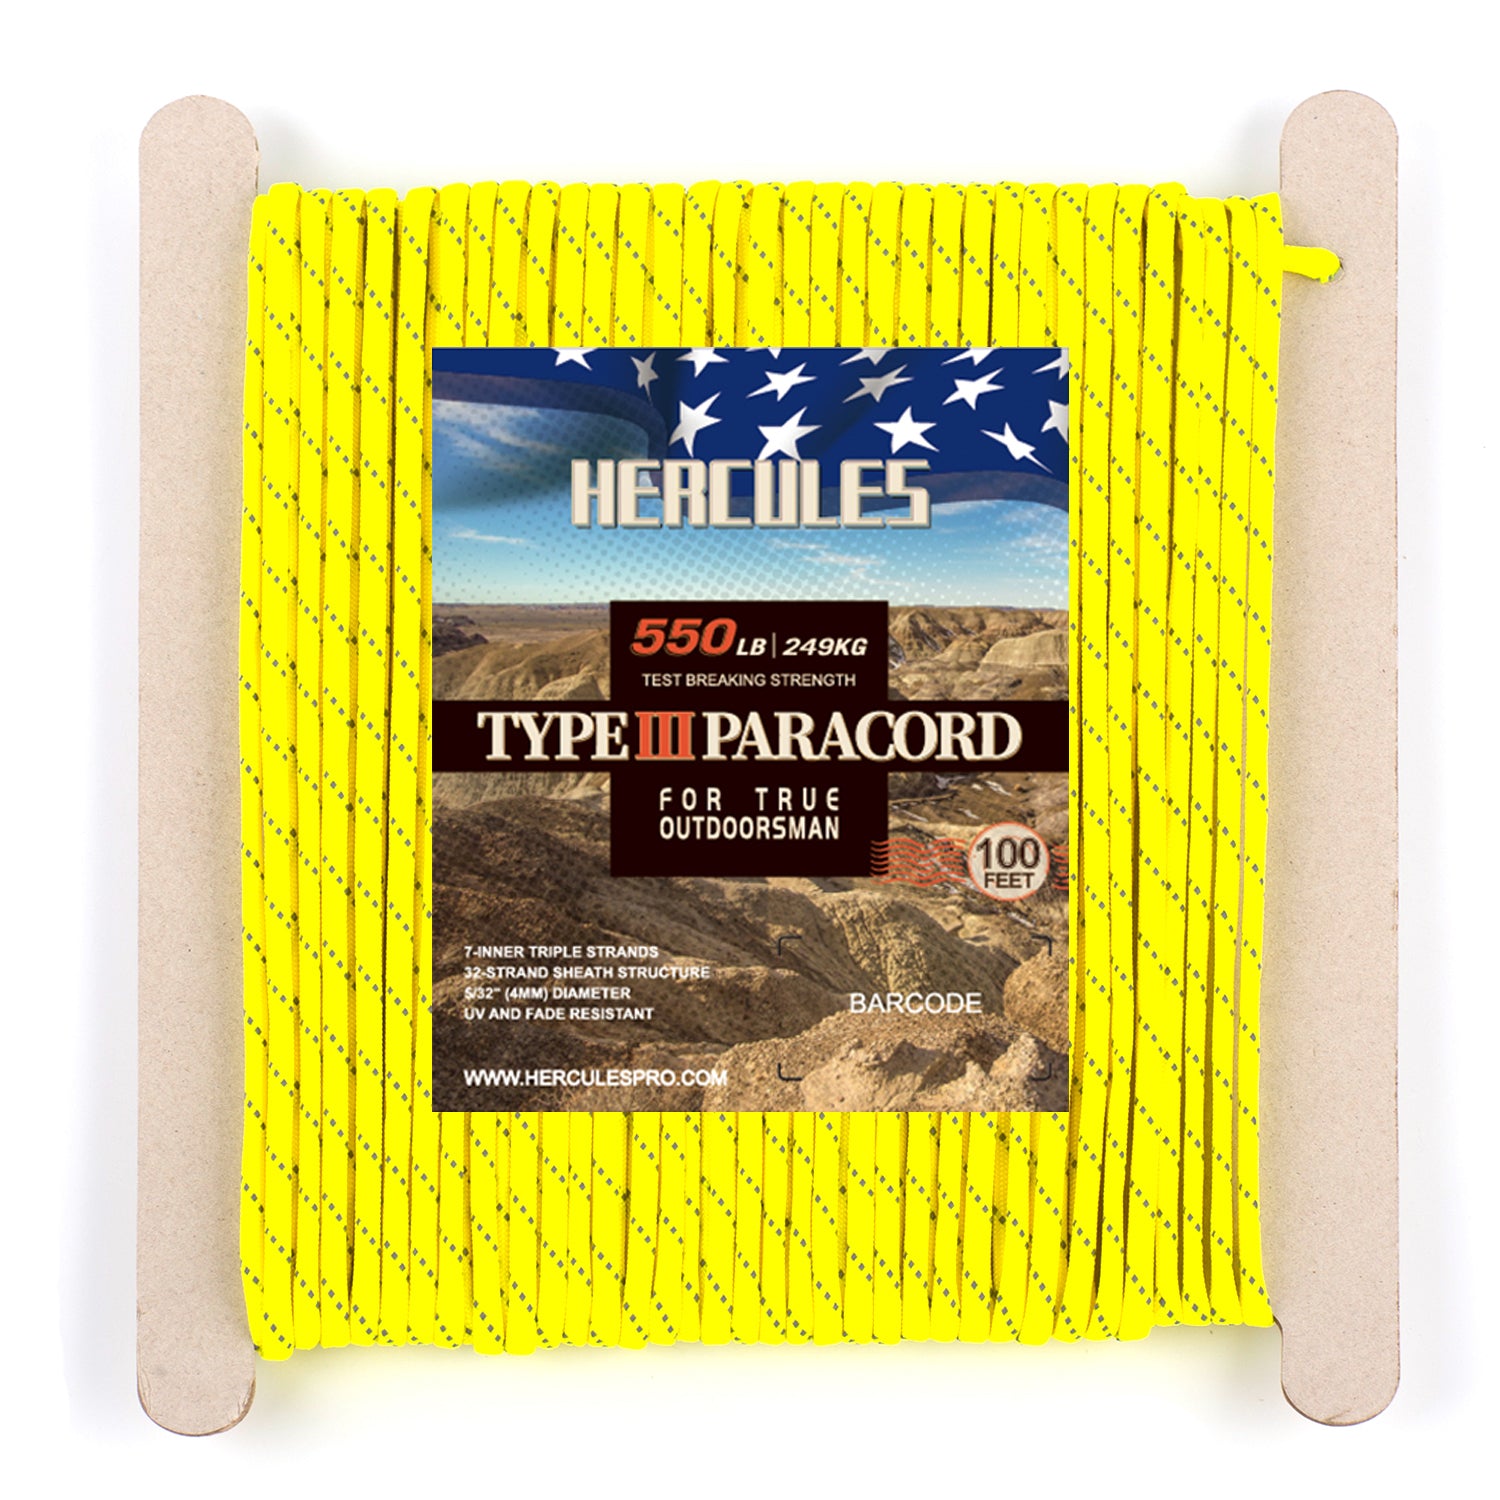 HERCULES Reflective 550 Paracord Neon Yellow for Camping Rope Type III Parachute Cord HERCULES